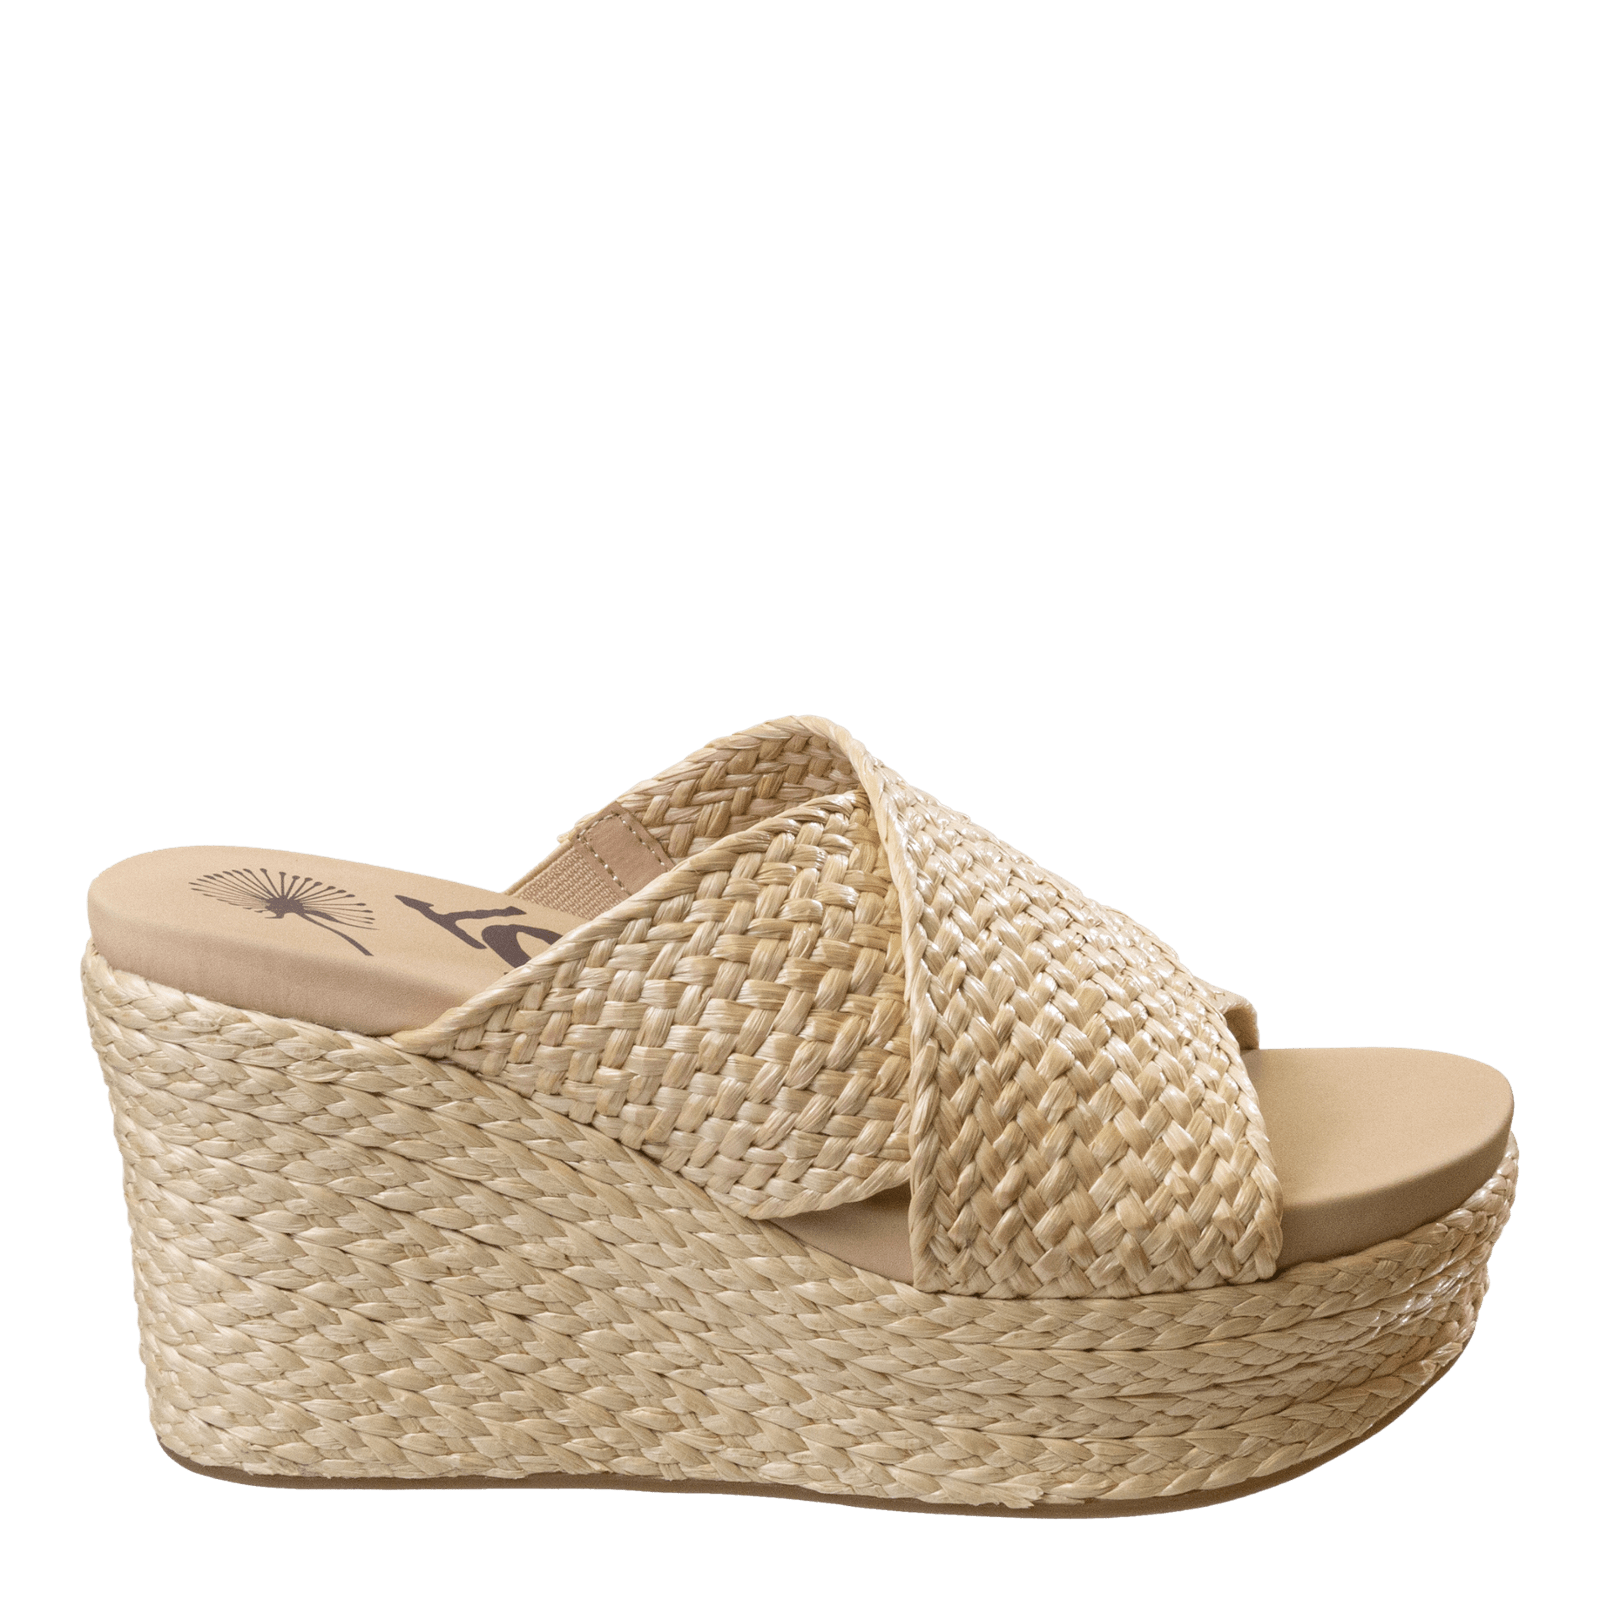 TUPELO in NATURAL Espadrille Sandals - OTBT shoes